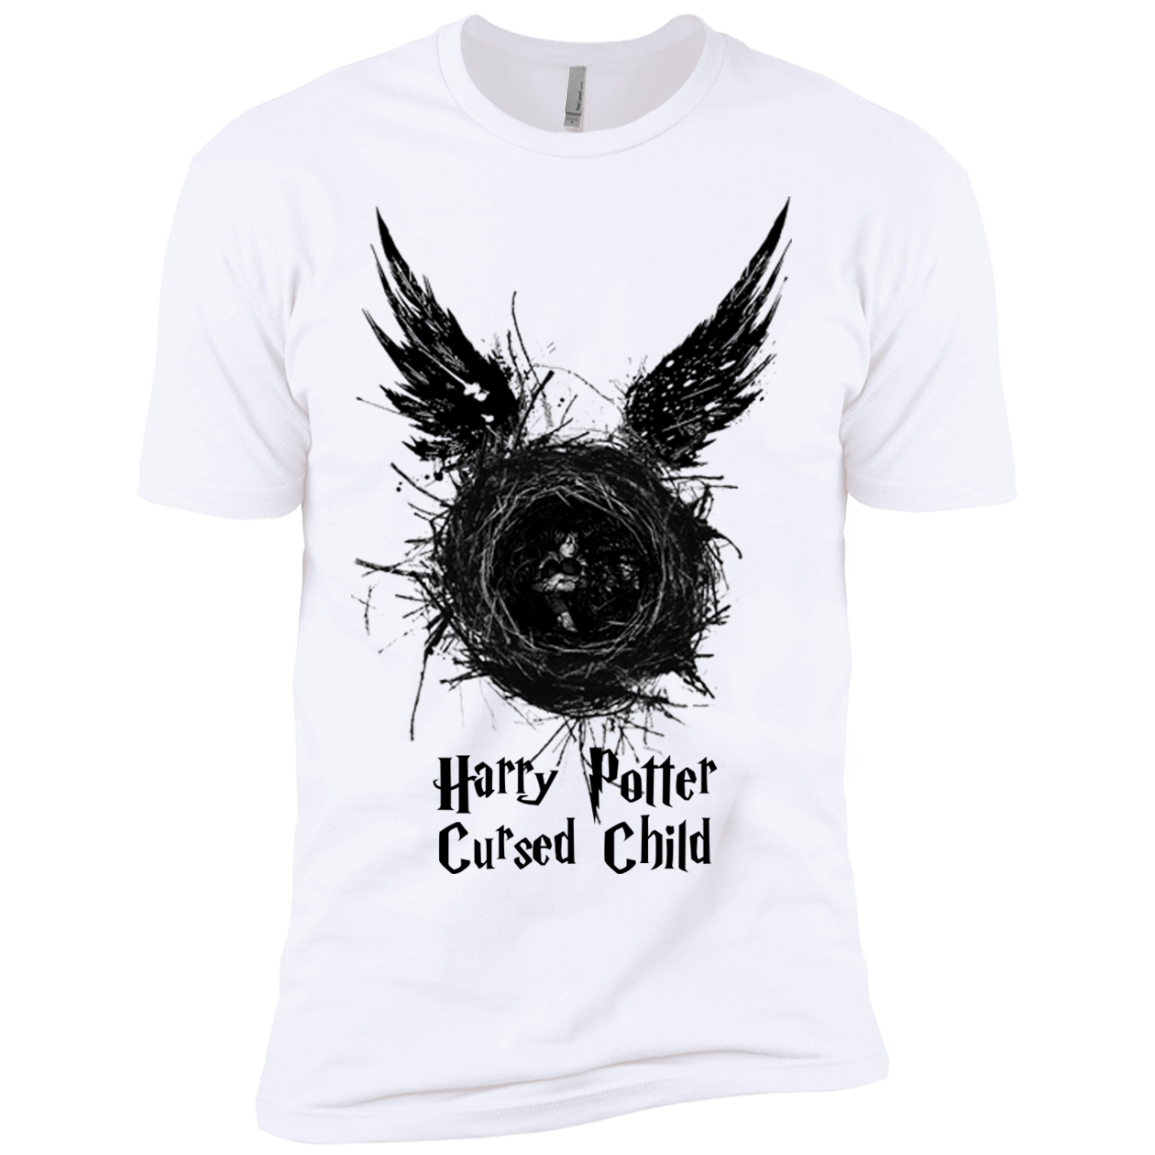 Harry Potter and the Cursed Child T-shirt, Hoodies - ifrogtees